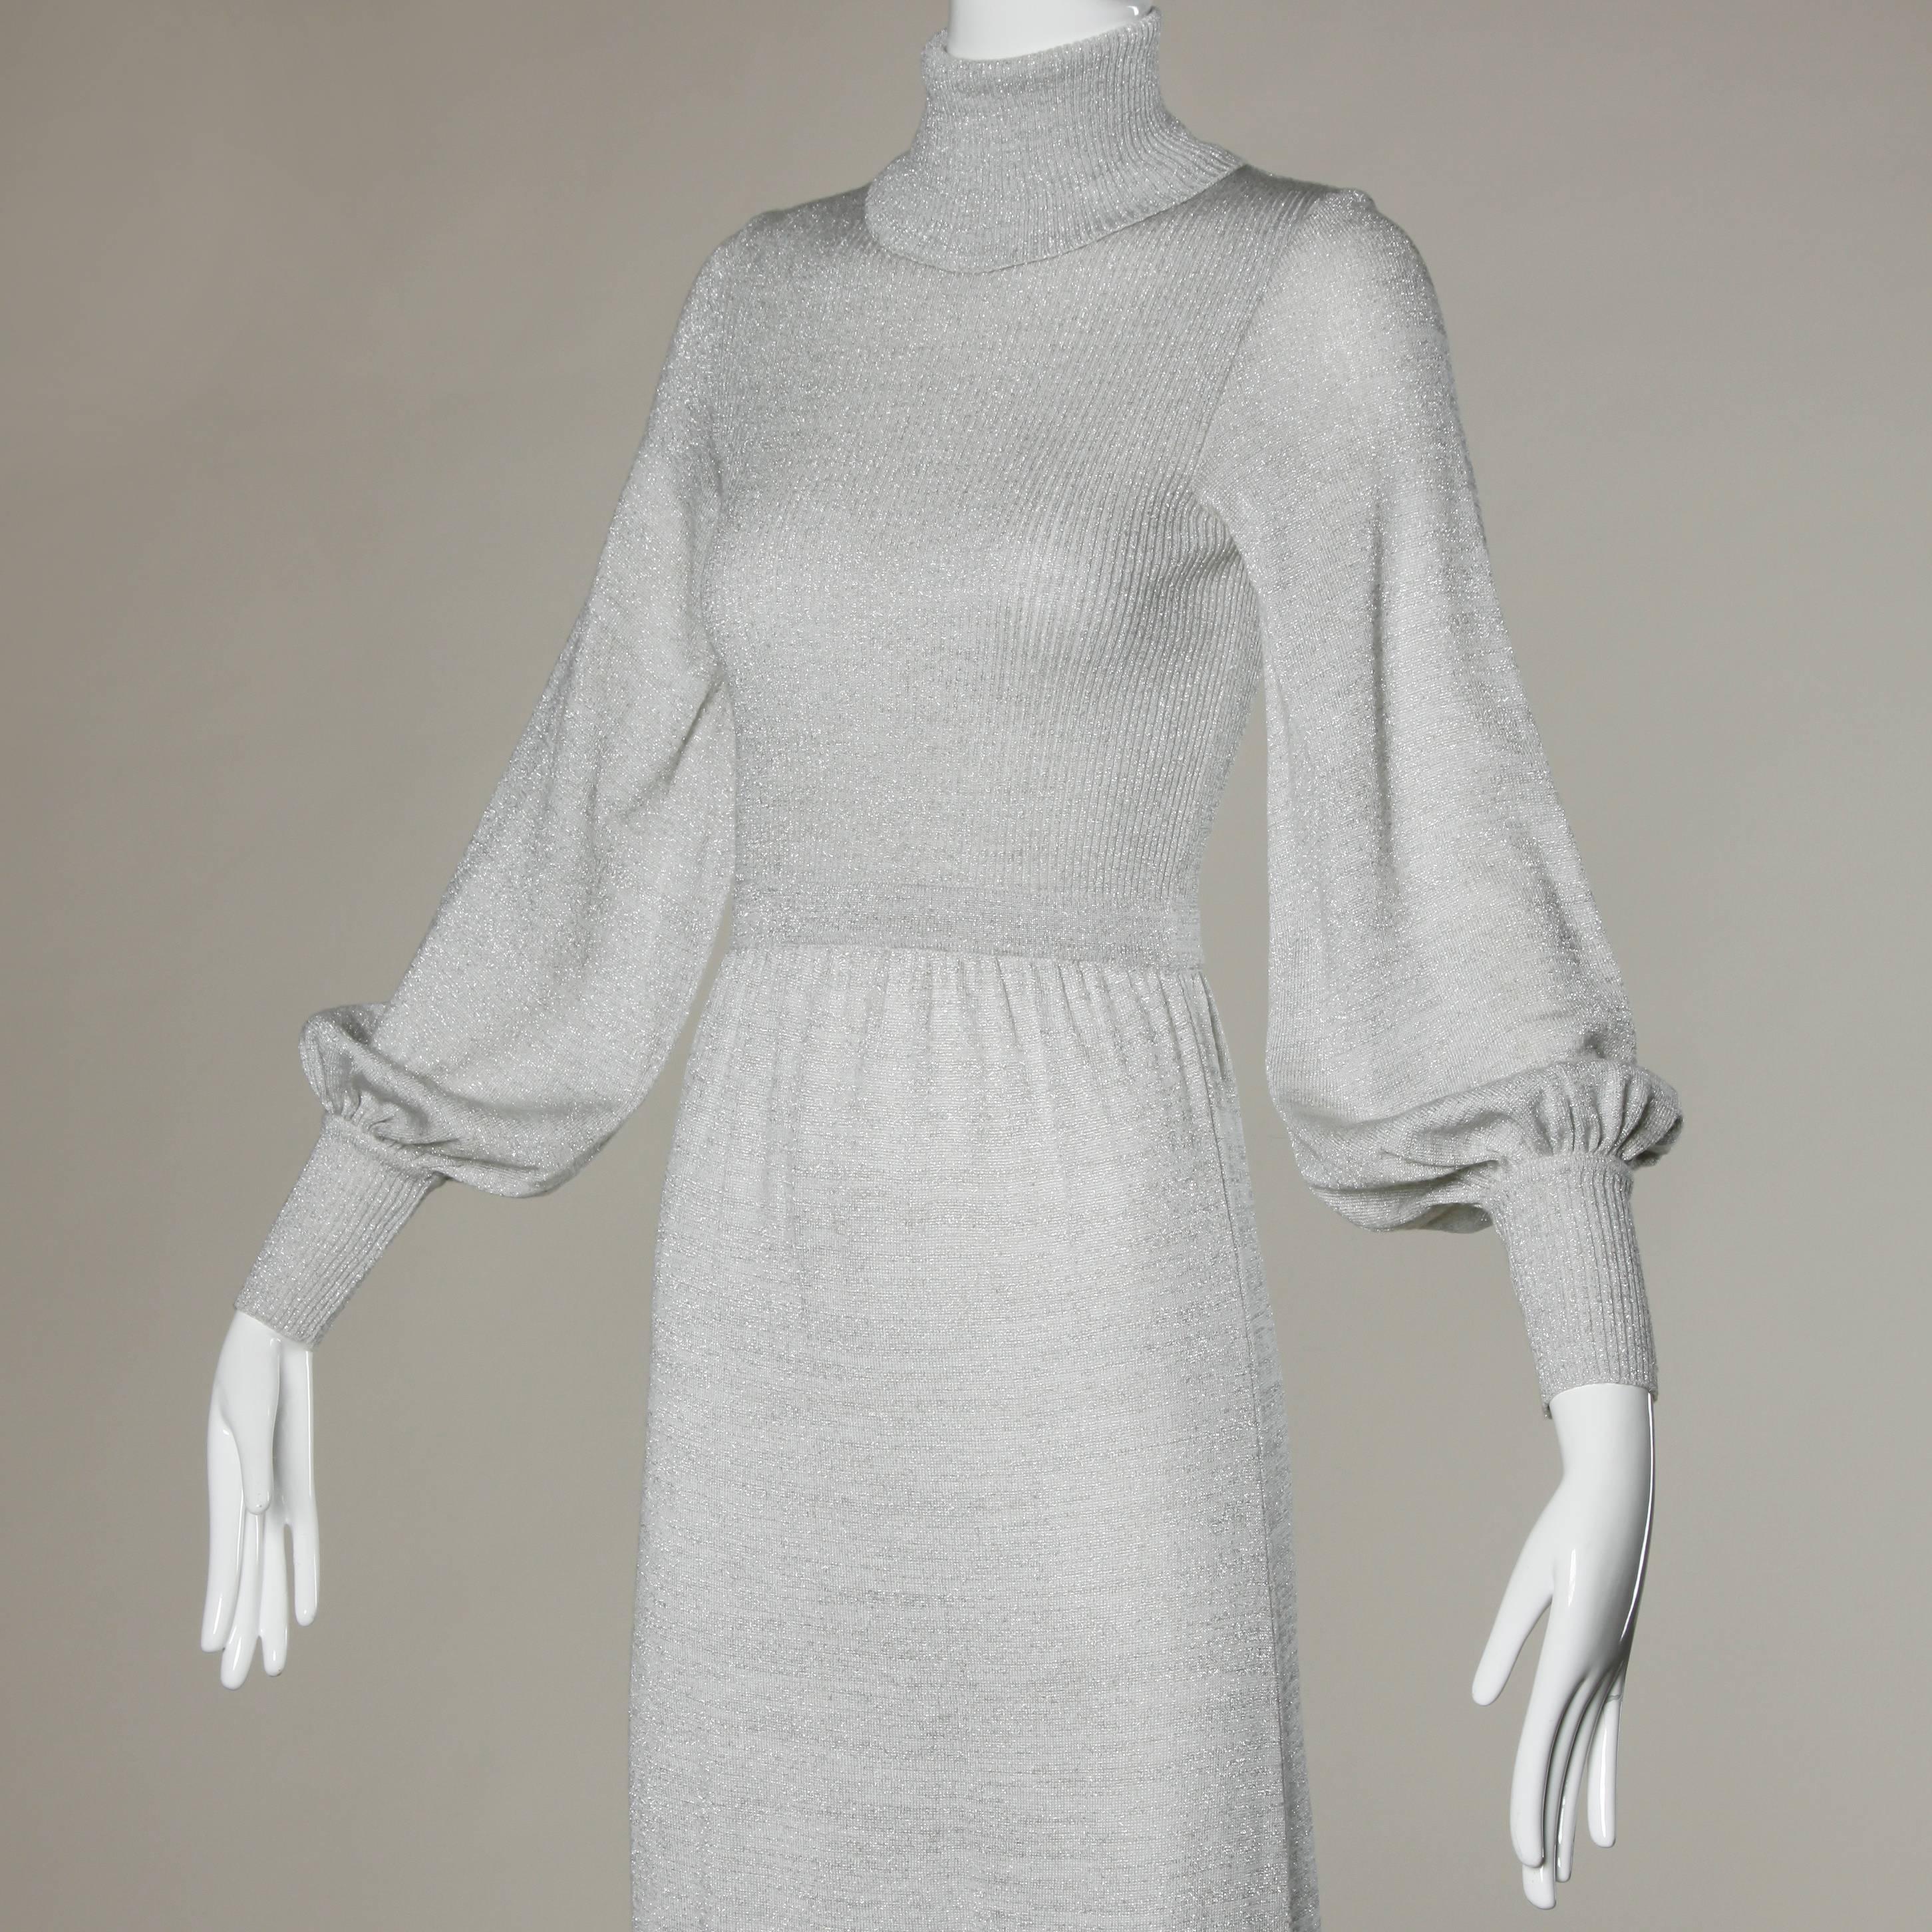 Vintage 1970s metallic silver knit maxi dress with billowy sleeves and a turtleneck collar.

Details:

Unlined
Back Zip Closure
Marked Size: US 5
Estimated Size: Small
Color: Silver Metallic
Fabric: 66% Acrylic/ 30% Wool/ 4% Lurex
Label: